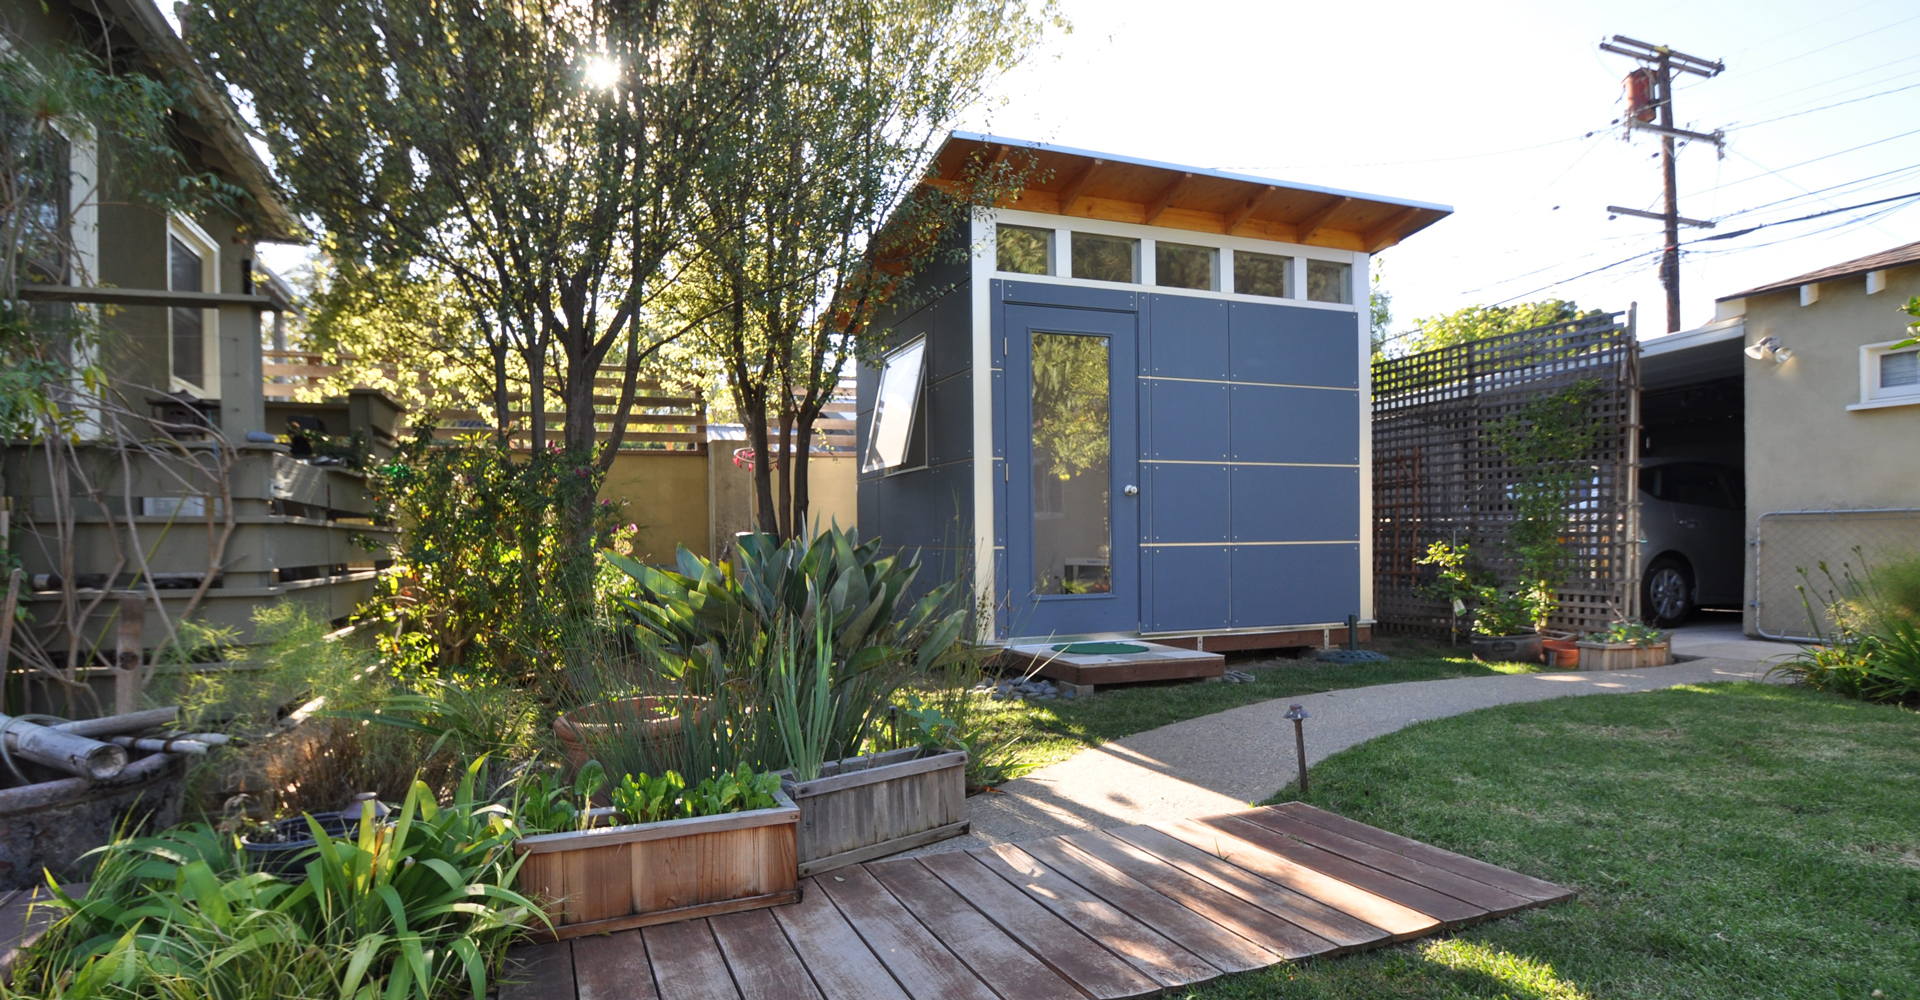 Shed-Quarters - American Structures and Patios